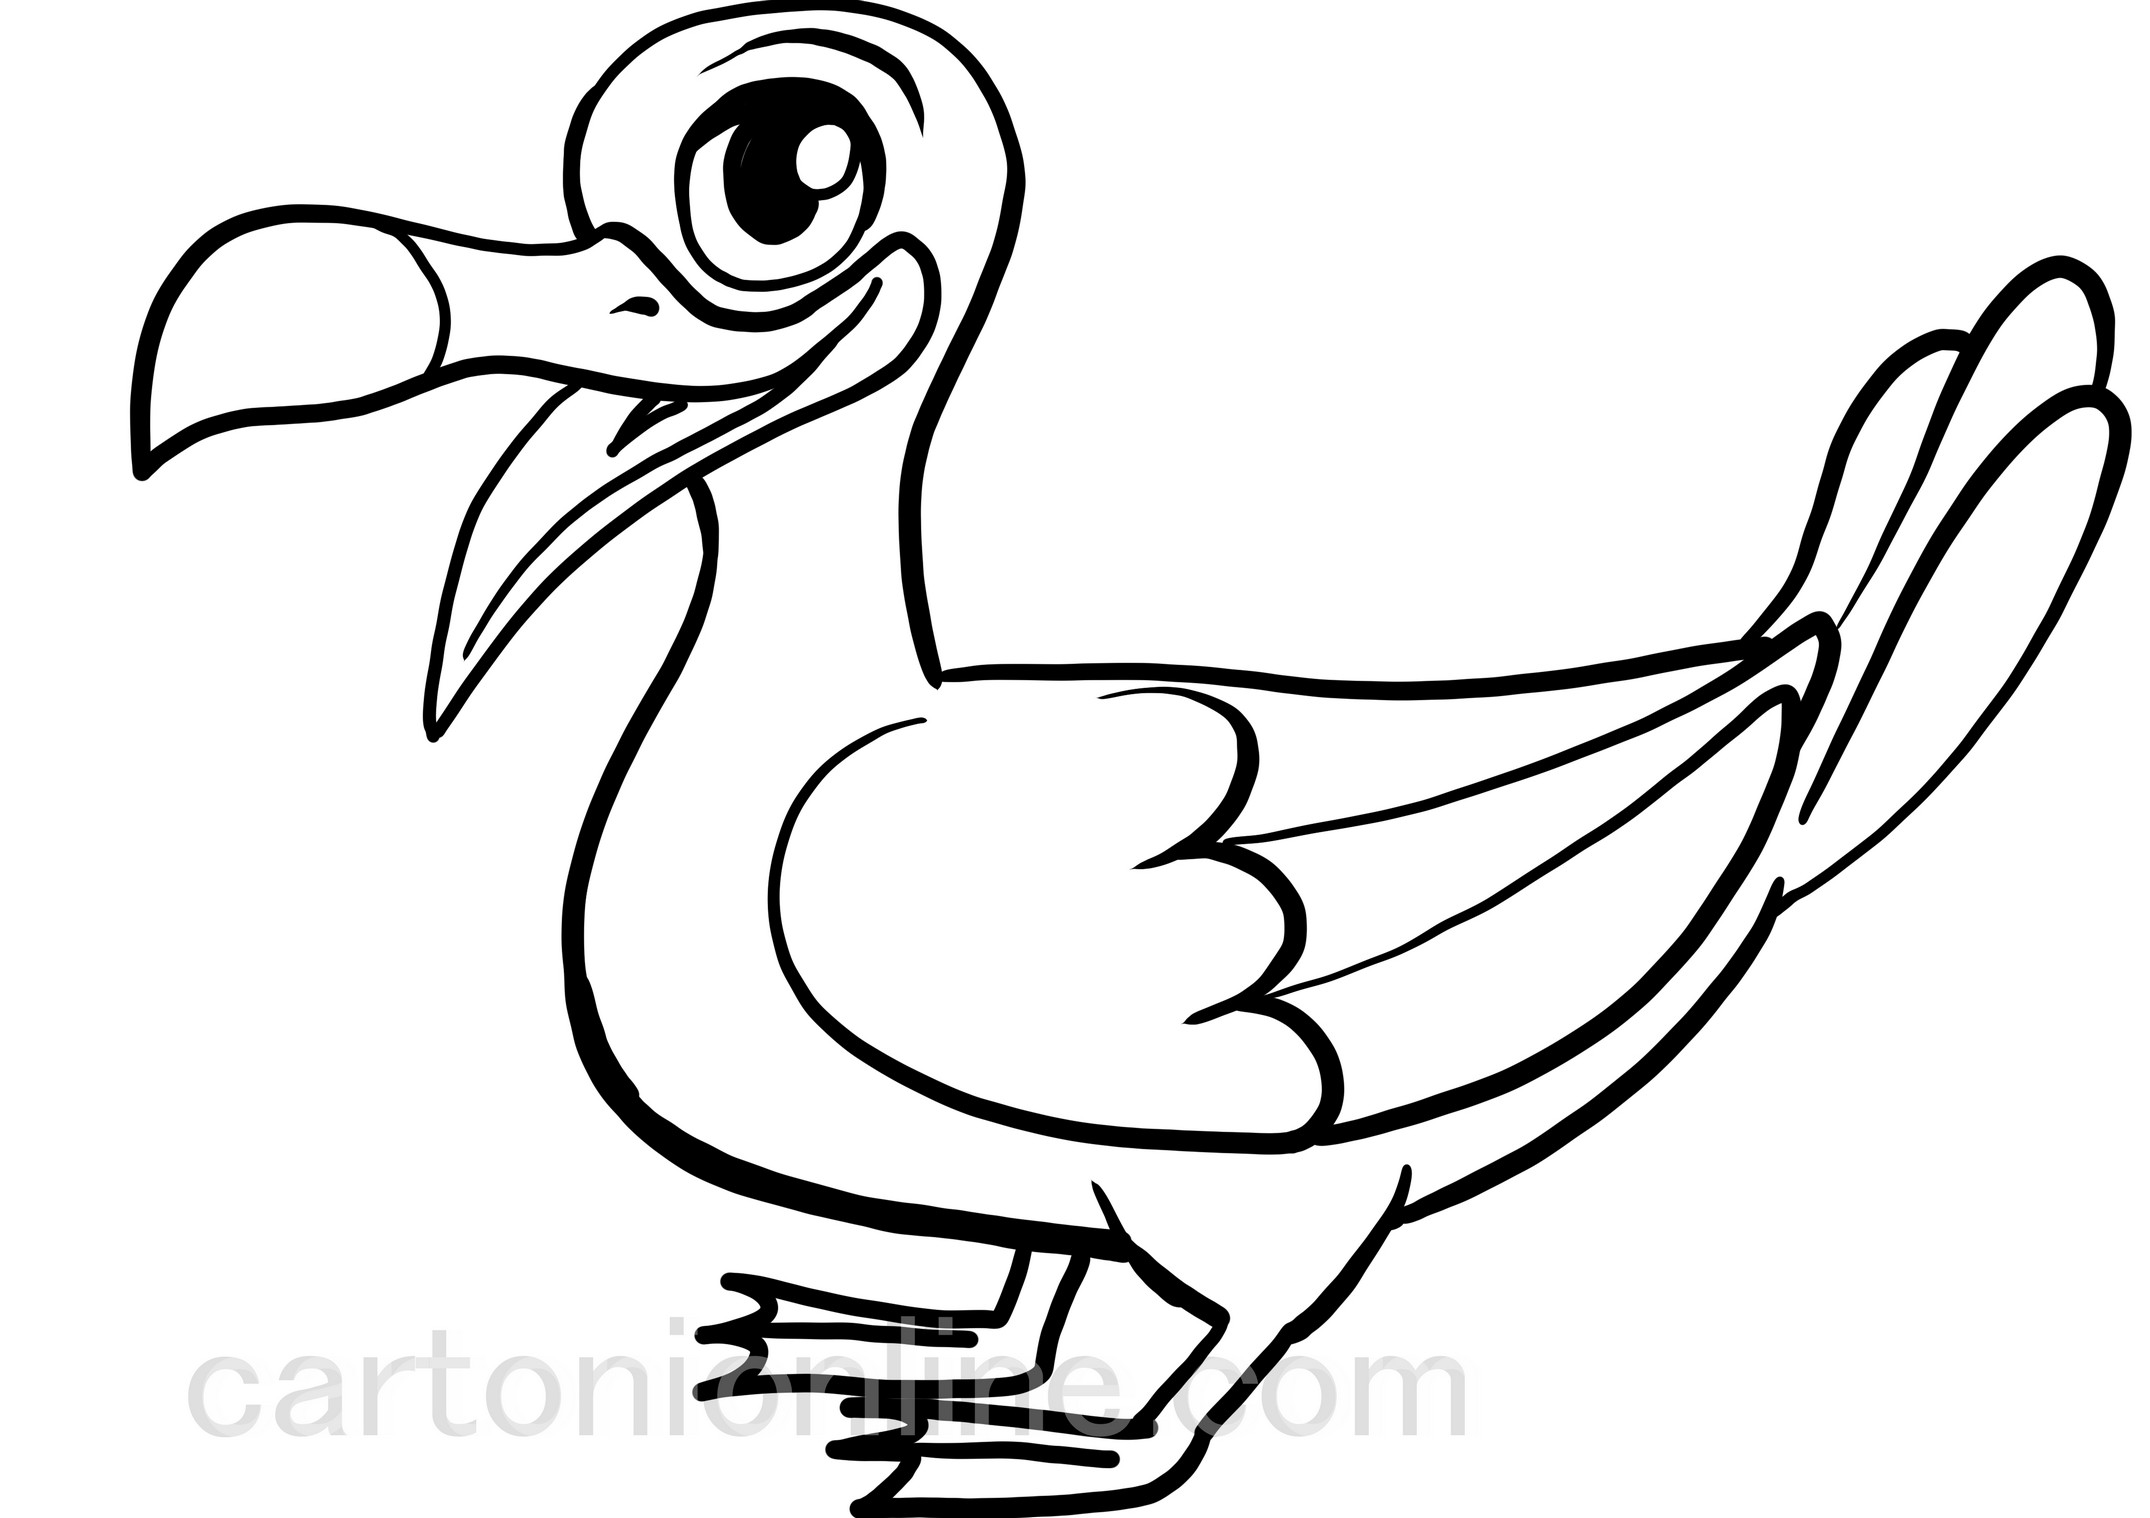 Albatross cartoon coloring page to print and coloring